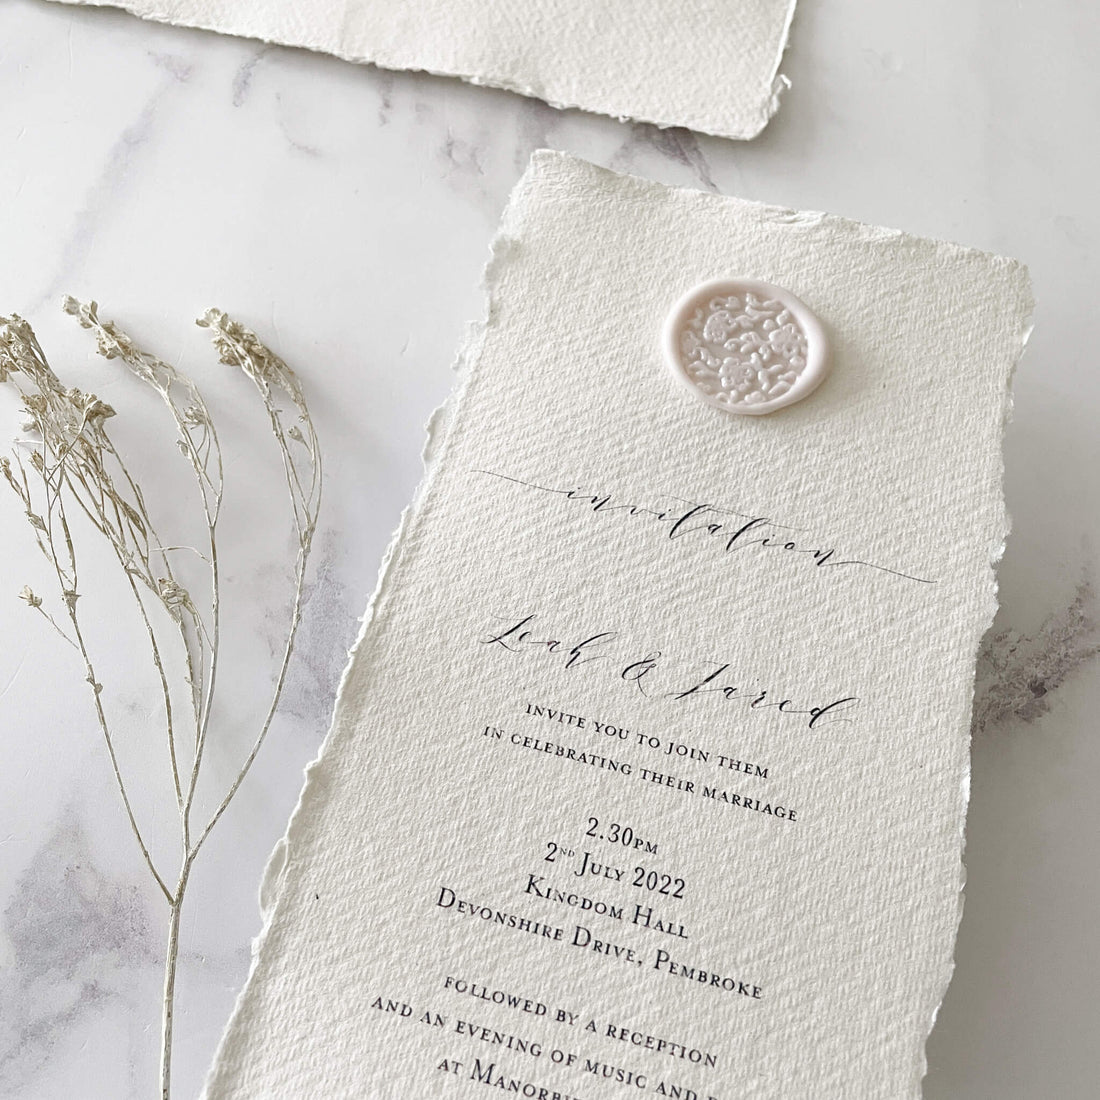 How To Make .... Simple but Stylish Invitations with Handmade Paper and Wax Seal